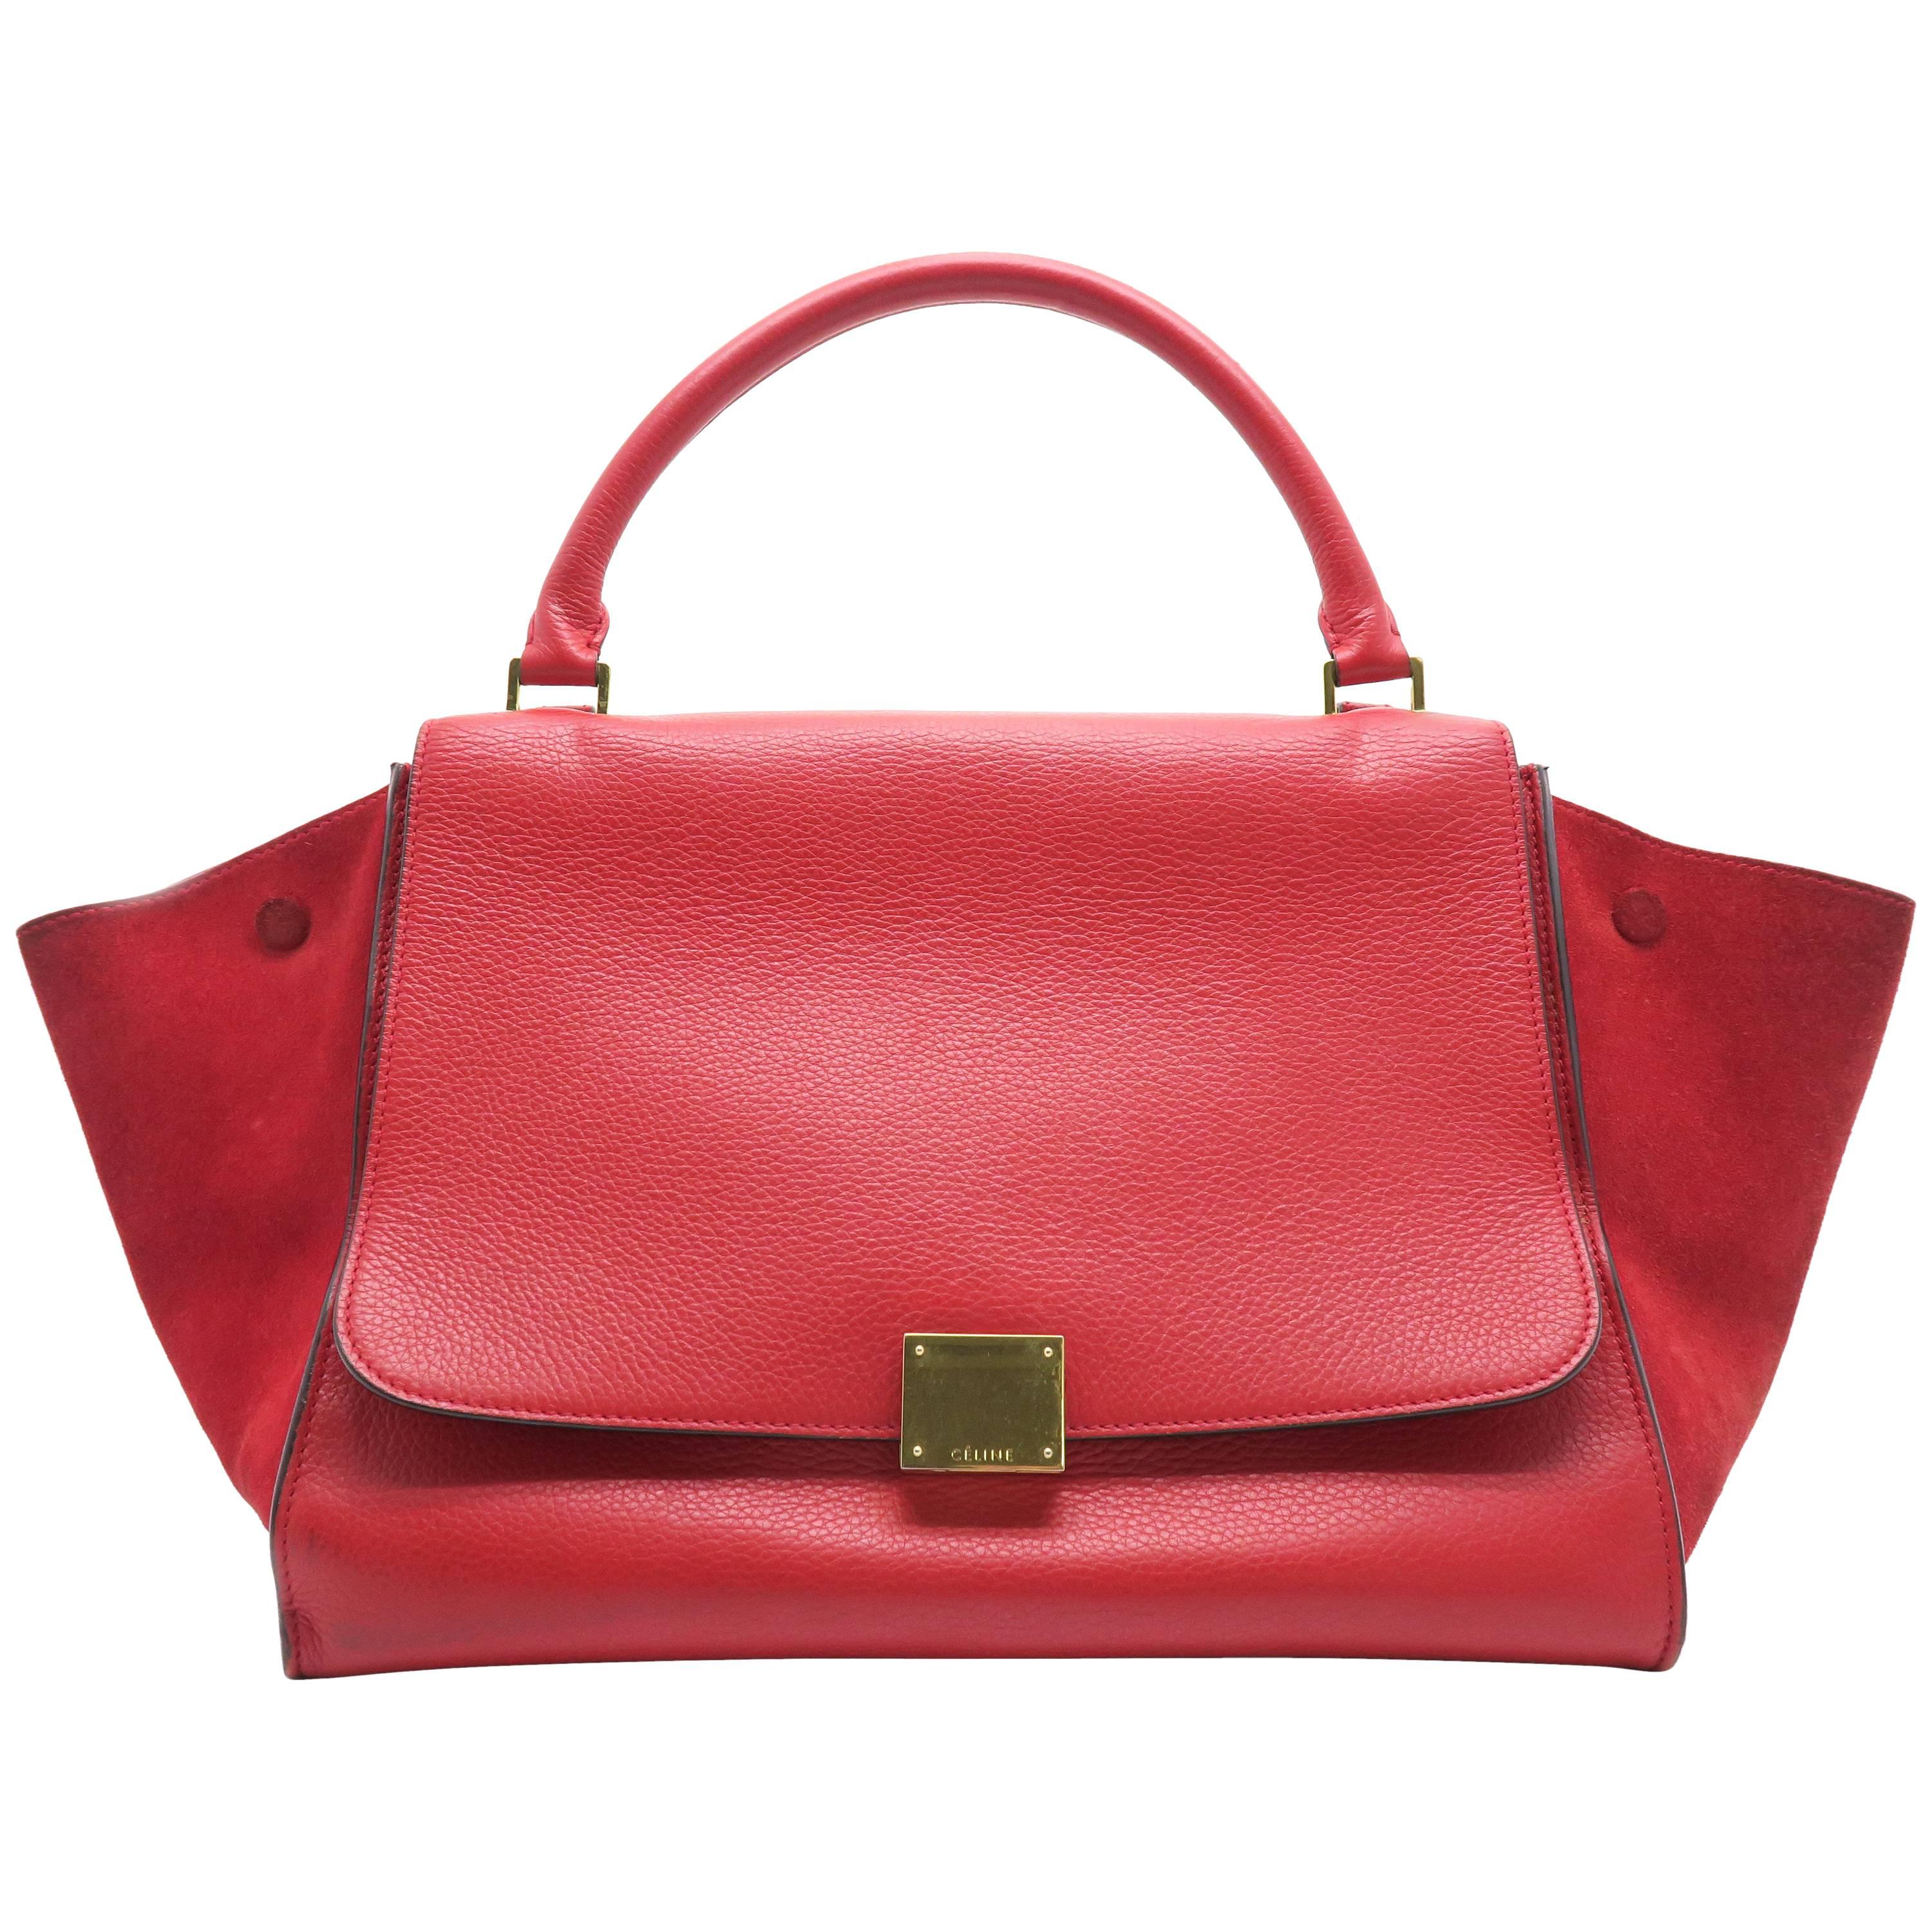 Celine Trapeze Red Calfskin Leather Suede Leather Satchel Bag